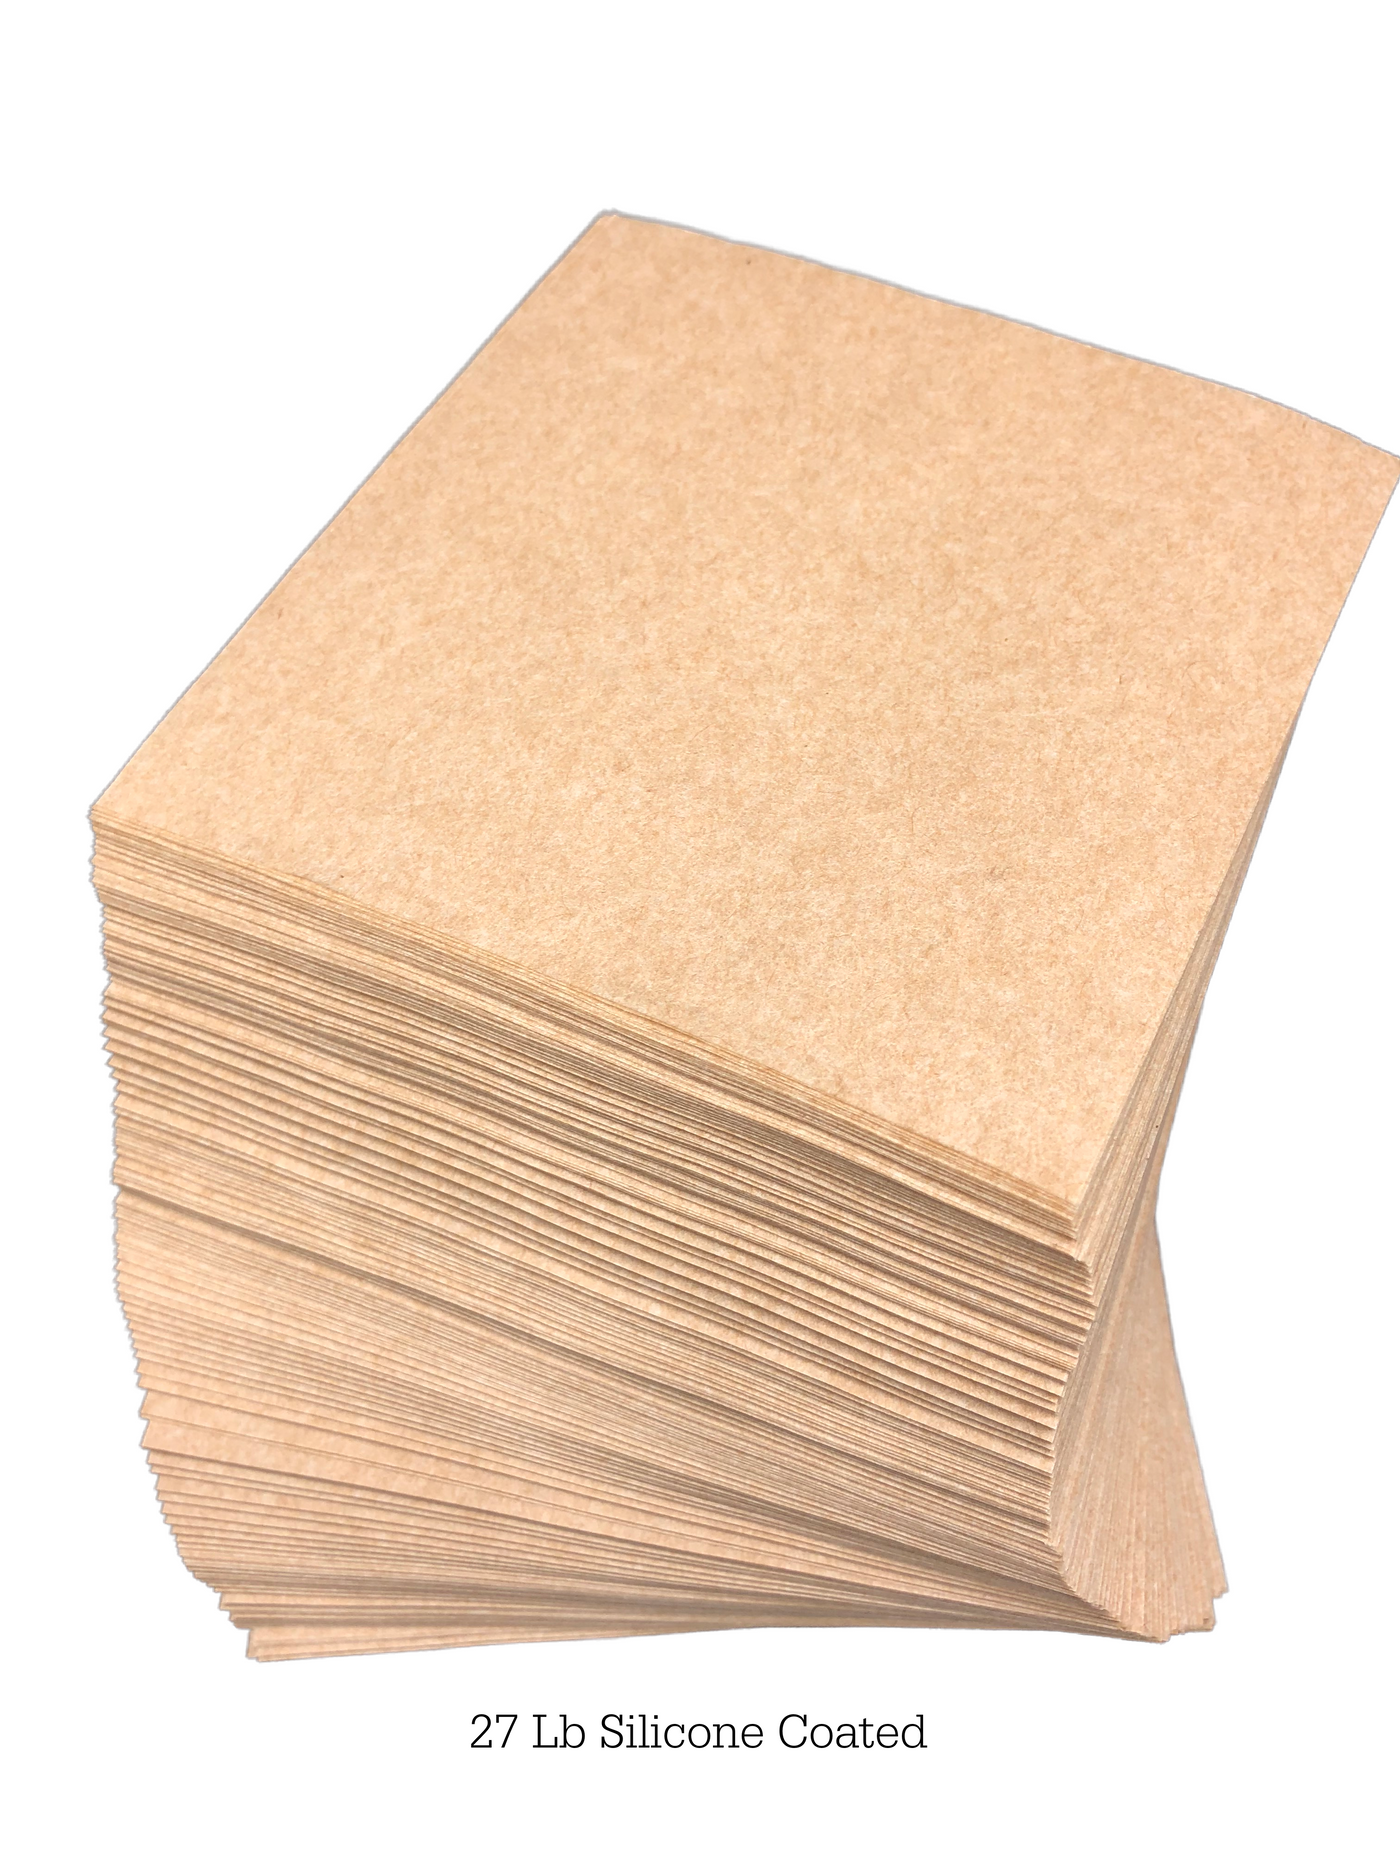 Camel Cardstock - Light Brown Cover Weight Paper - Parchtone – French Paper